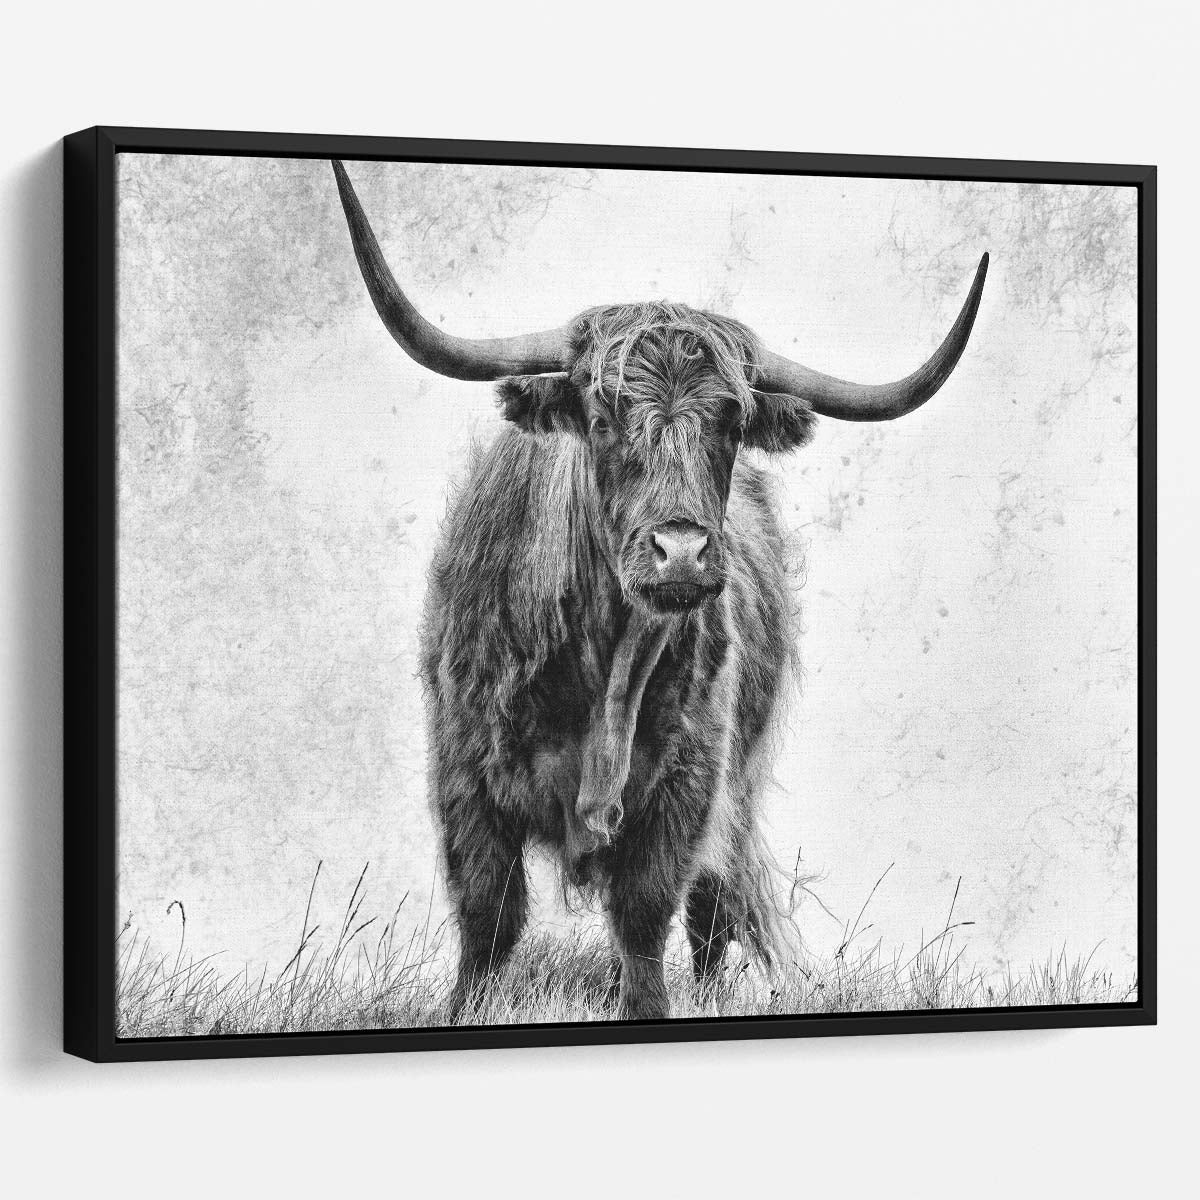 Monochrome Highland Cow in Countryside Field Wall Art by Luxuriance Designs. Made in USA.